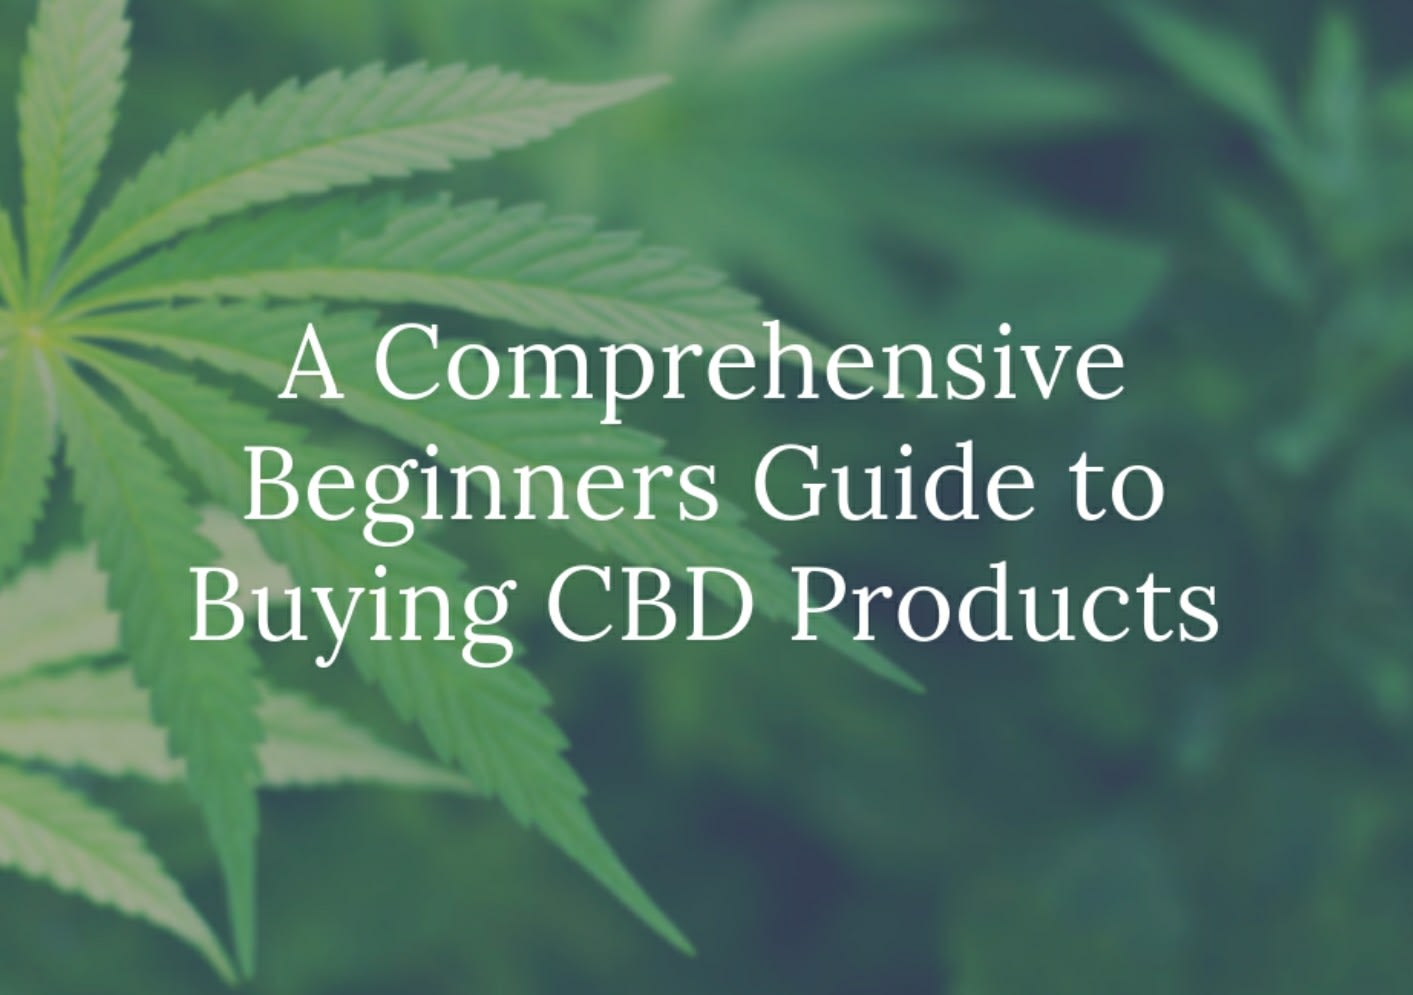 A Comprehensive Beginners Guide to Buying CBD Products - A Journey Through the Fog